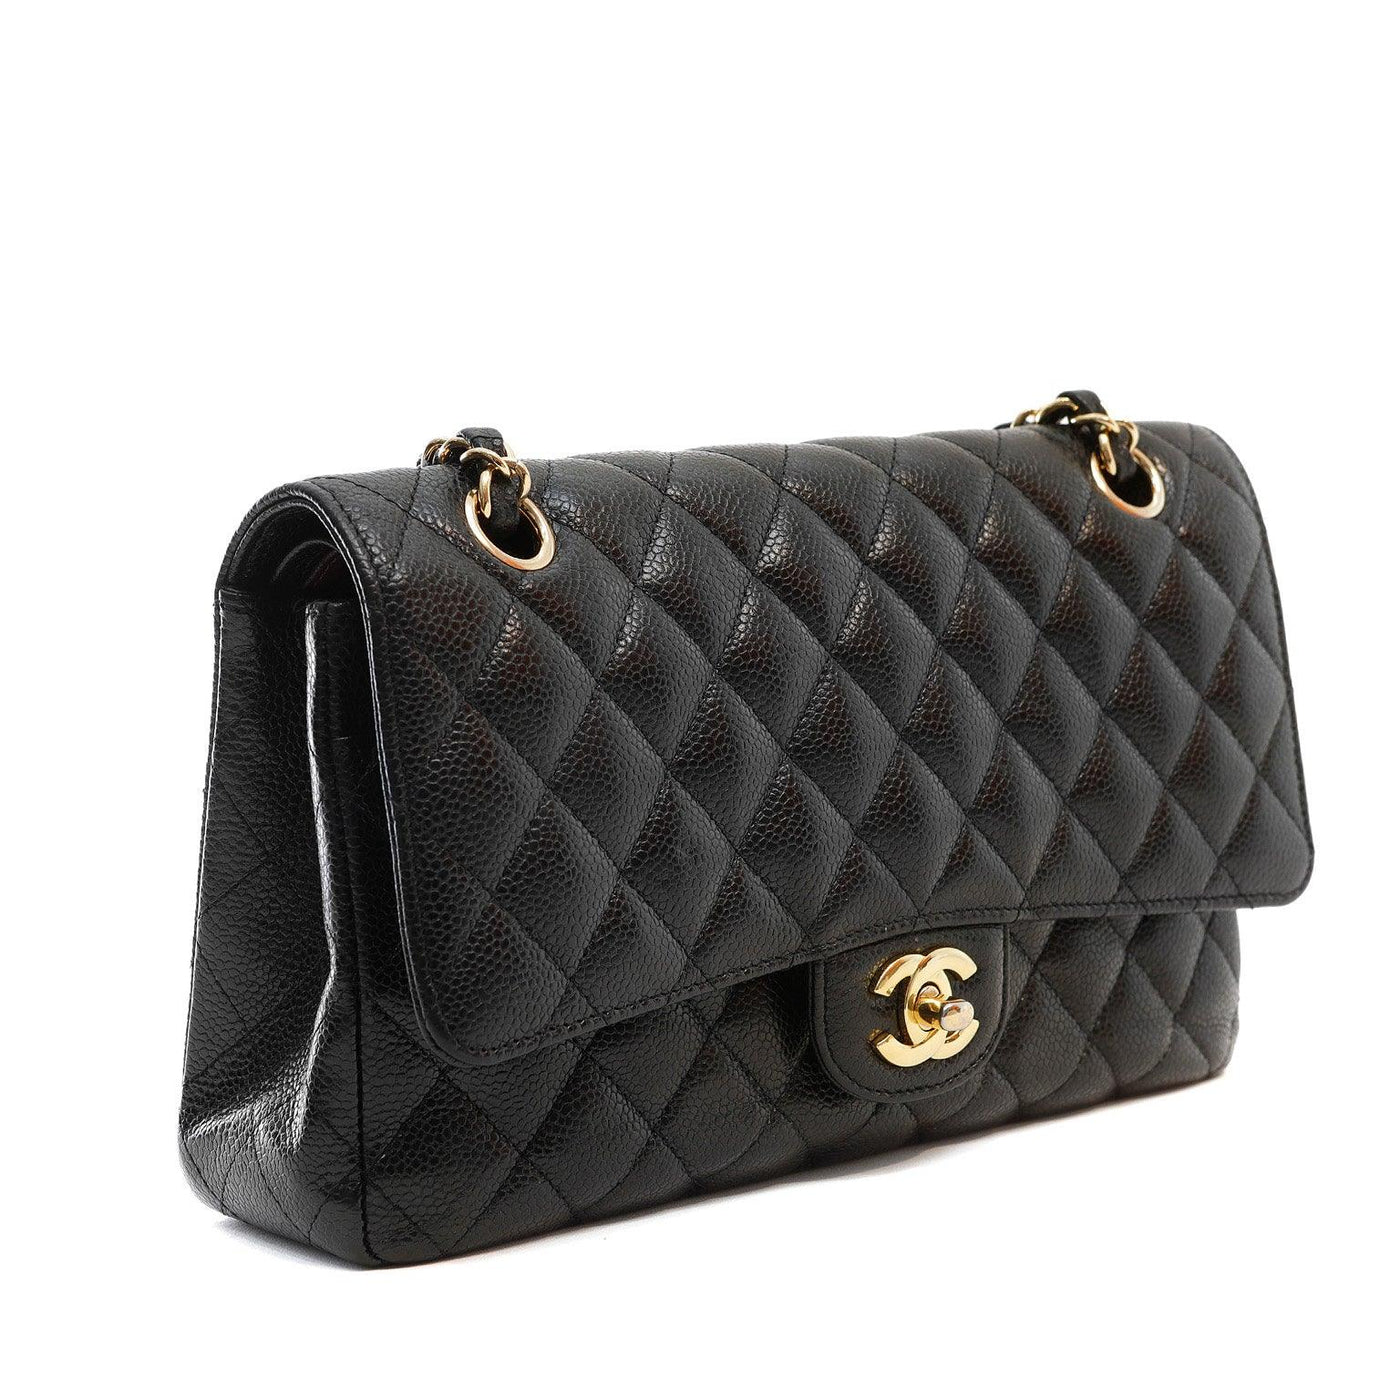 Chanel Black Caviar Medium Classic Flap with Gold Hardware - Only Authentics